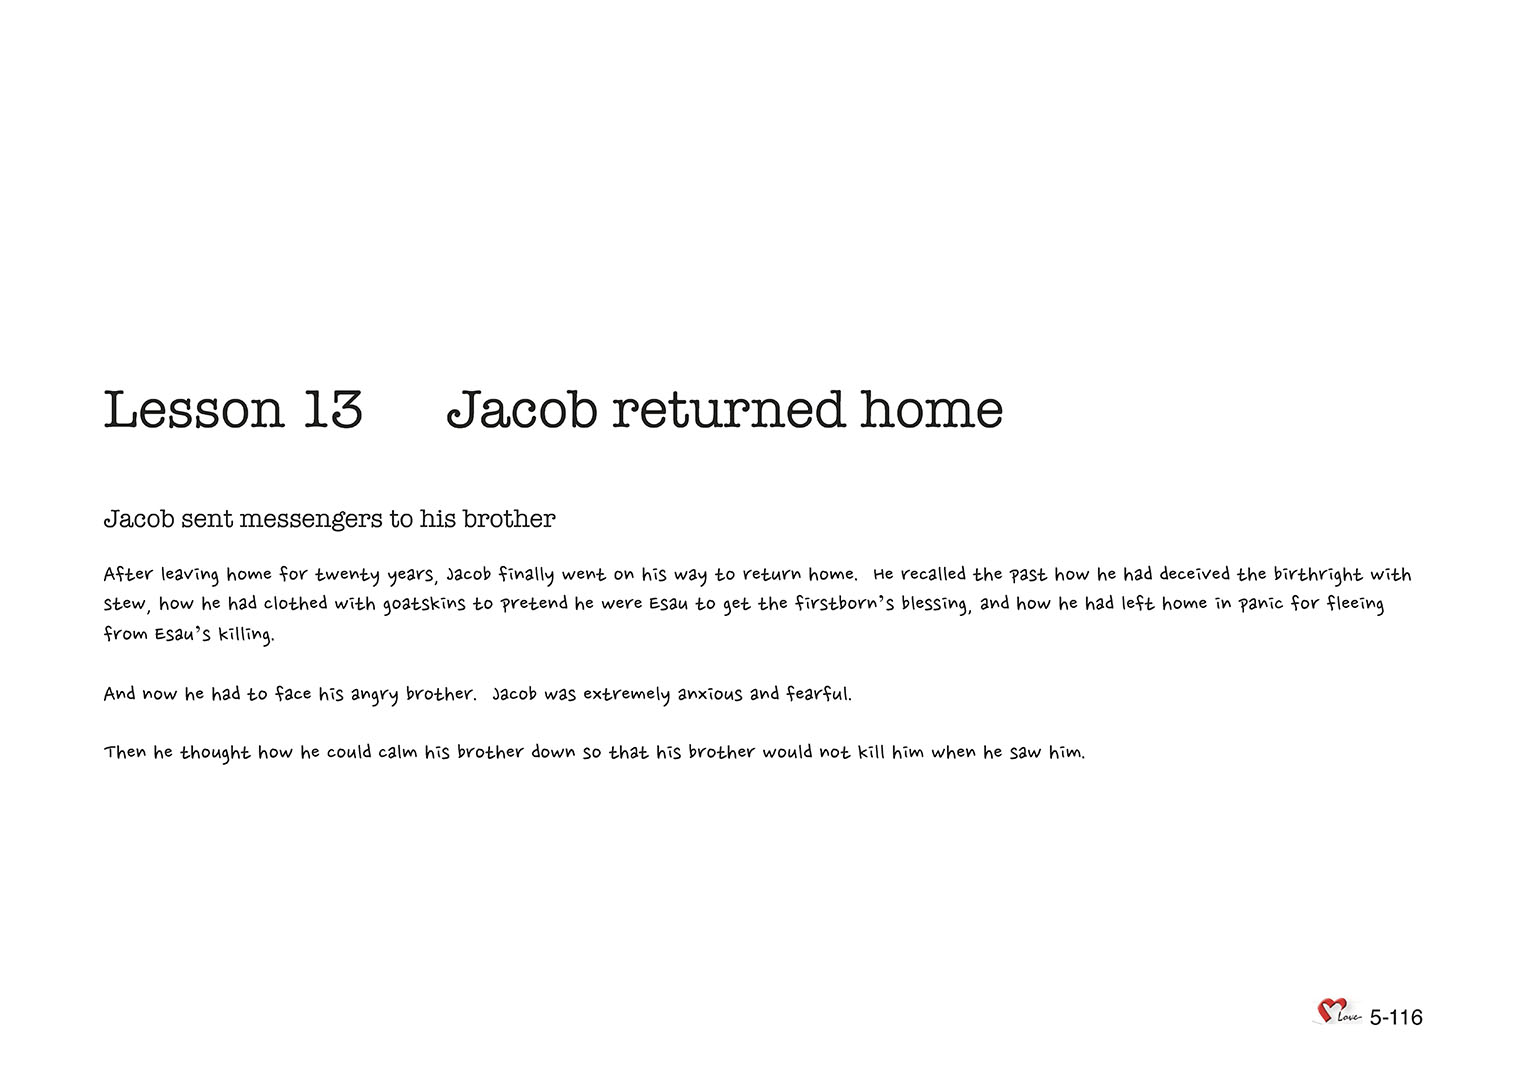 Chapter 5 - Lesson 13 - Jacob returned home